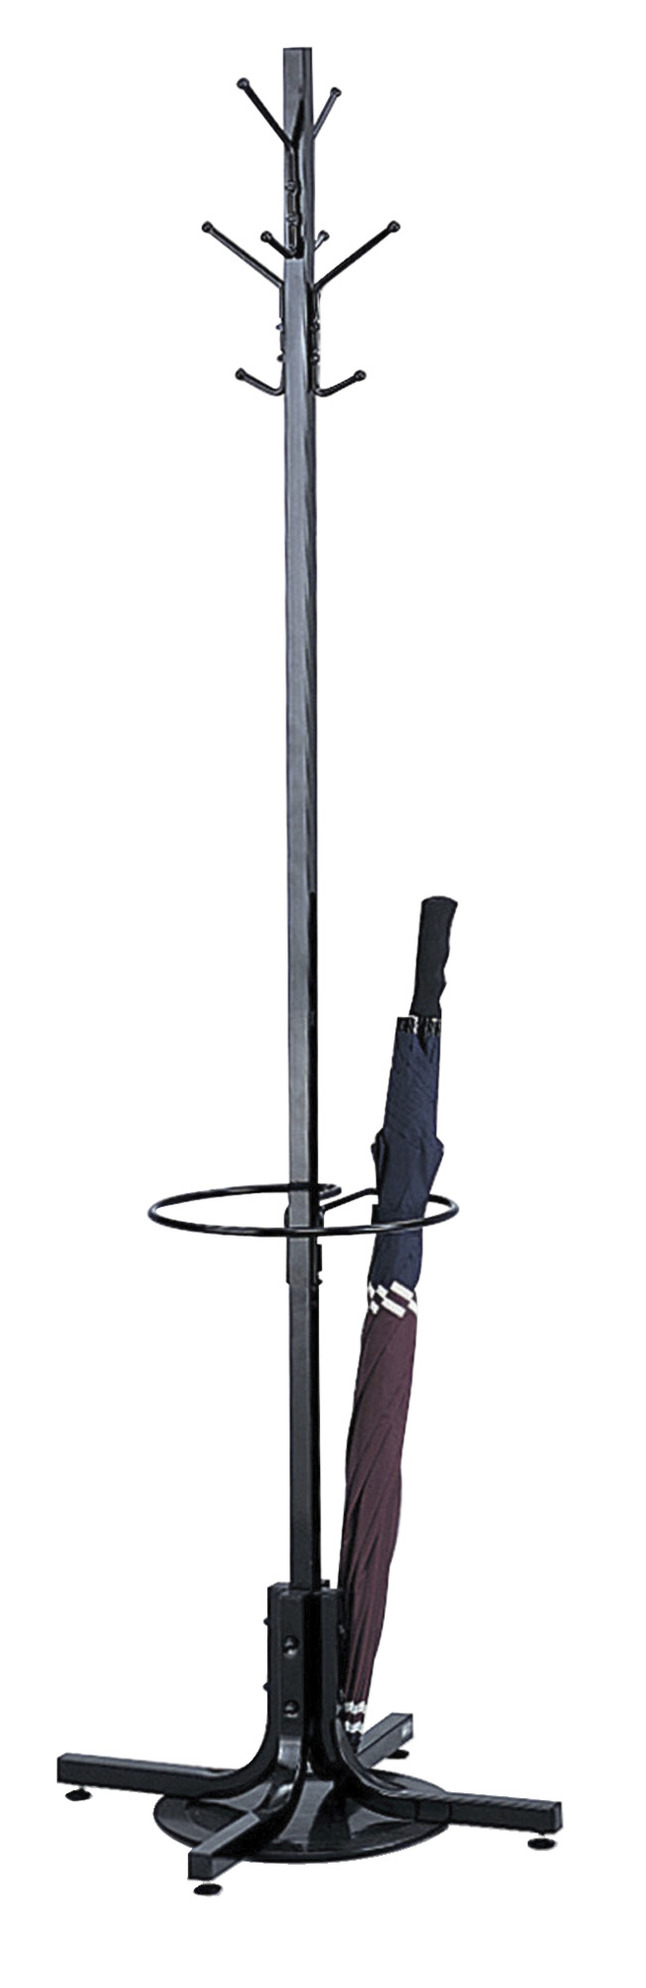 Safco Coat Rack with Umbrella Stand, 21 x 21 x 70 Inches, Black, Item Number 1083497